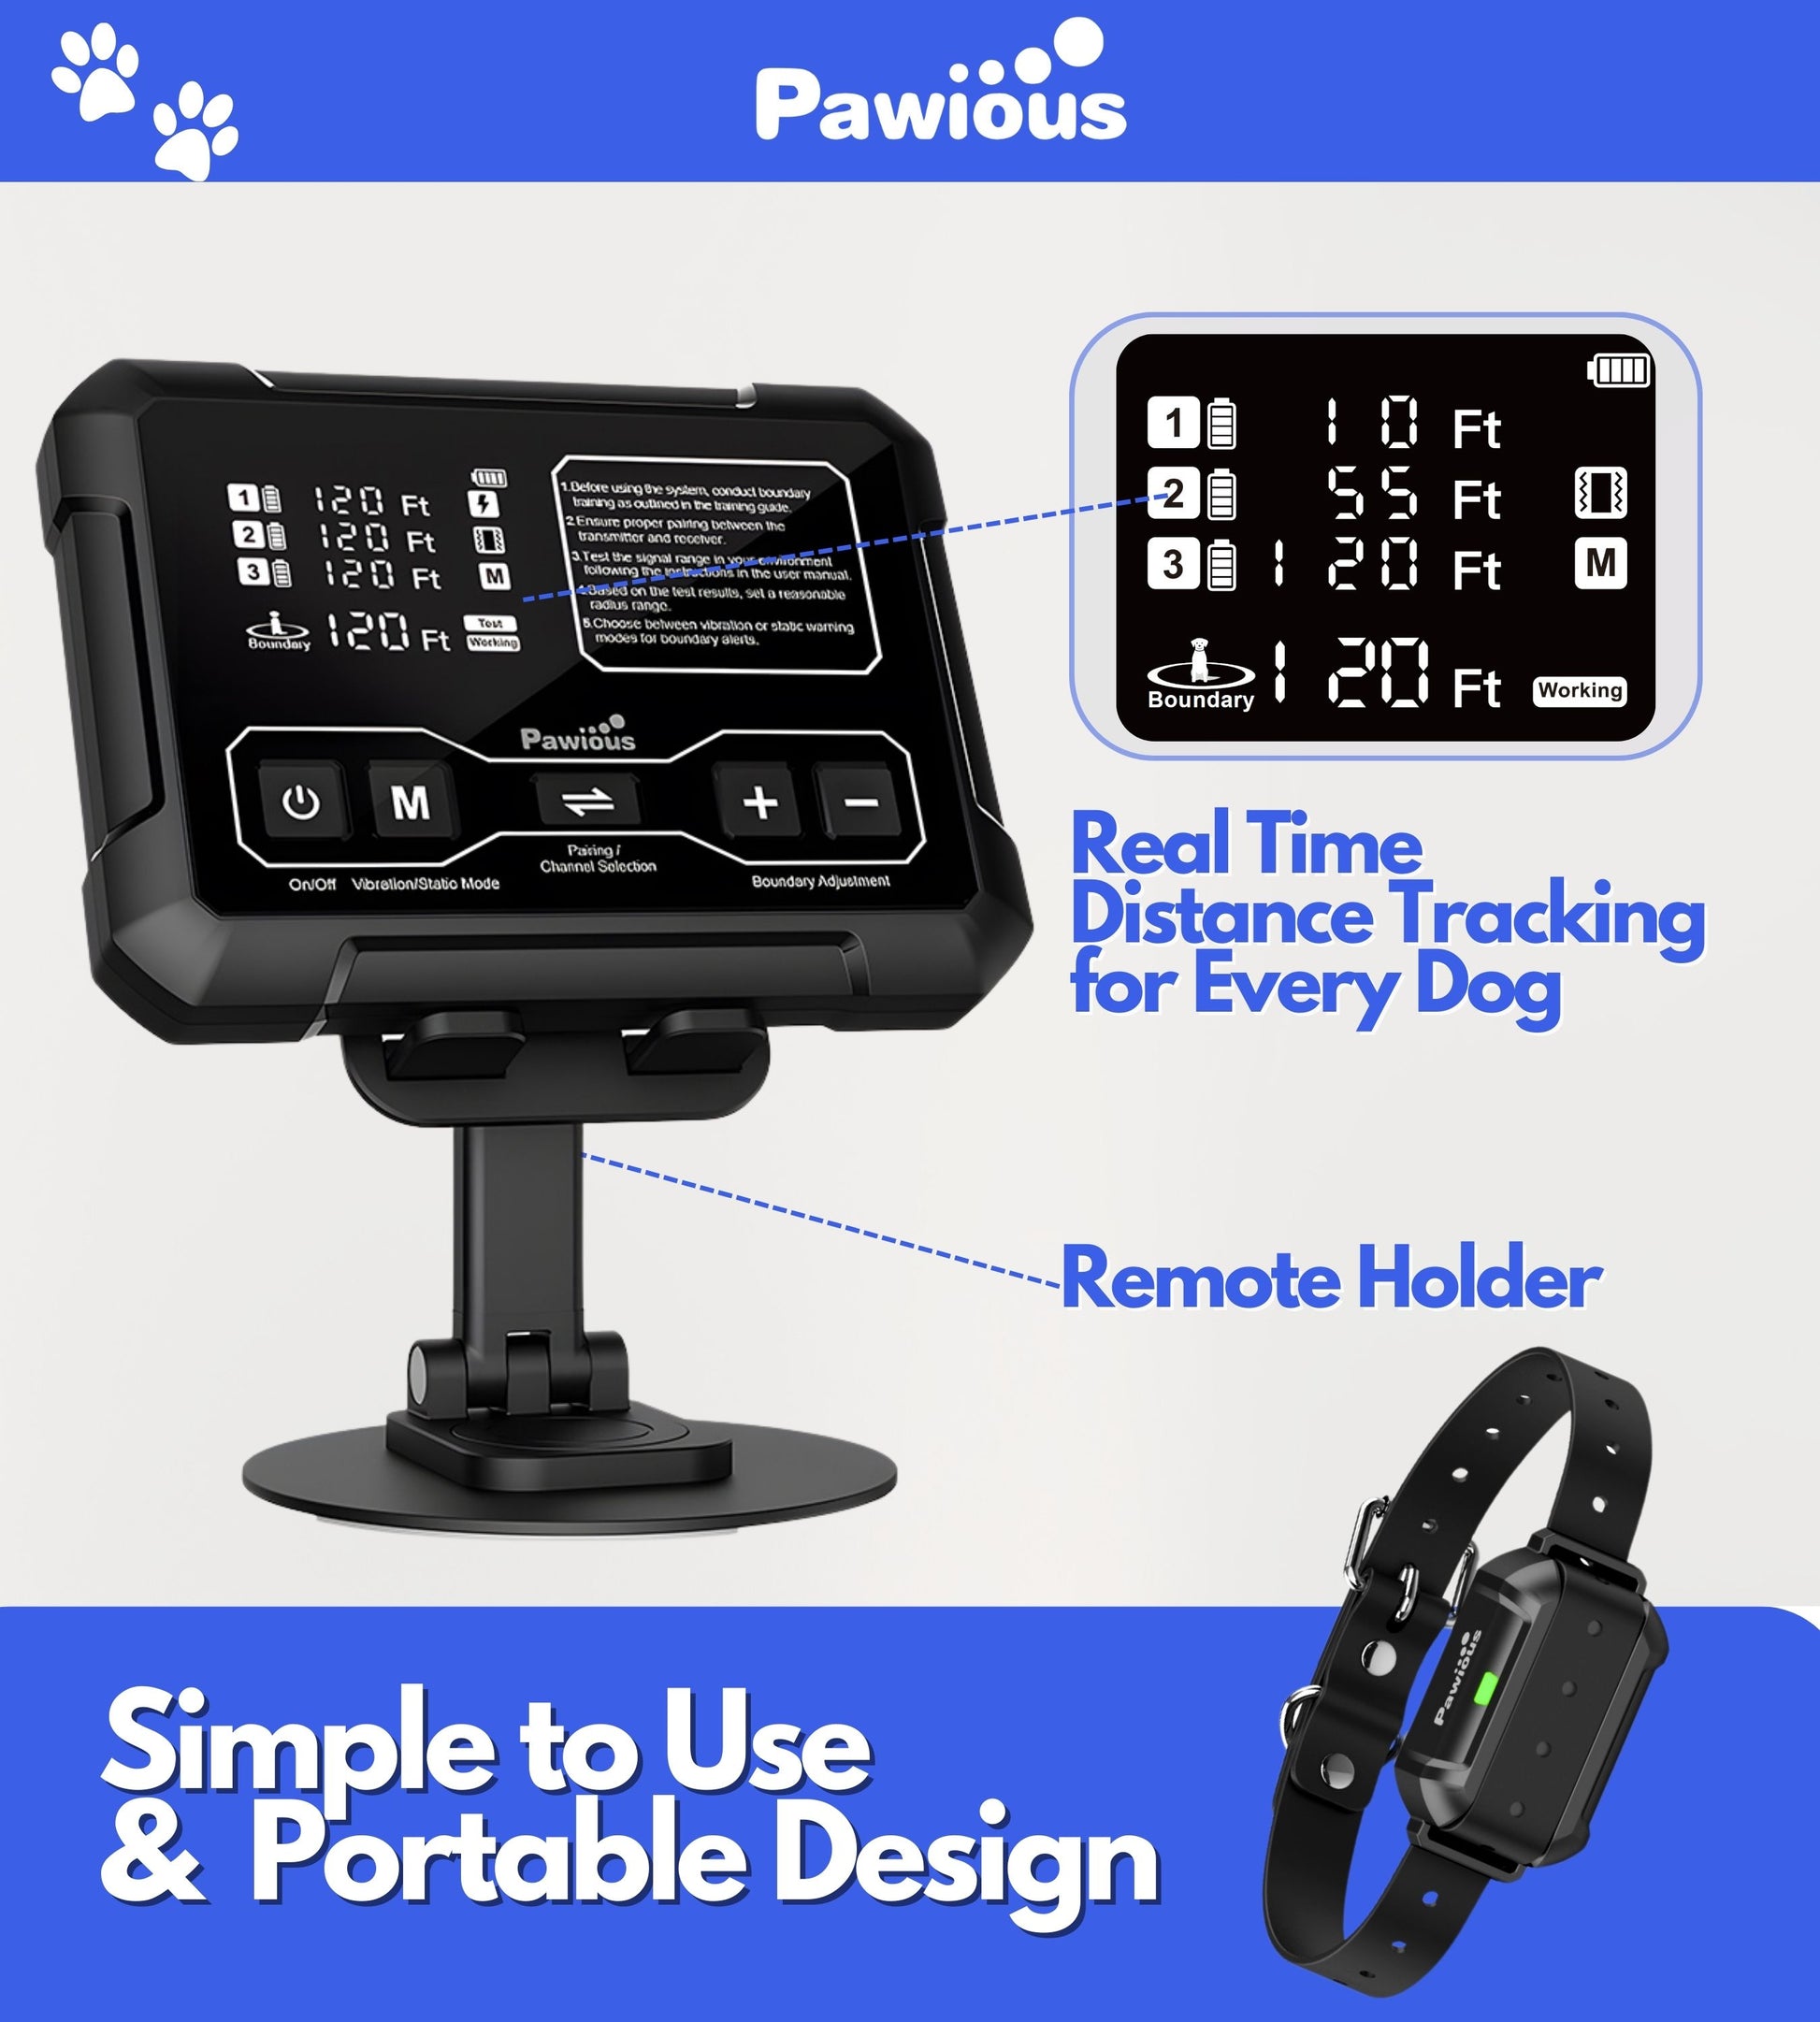 Wireless Dog Fence F900 - High Precision, Control Up to 3 Dogs, Secure Up to 1 Acre, Perfect for Homeowners